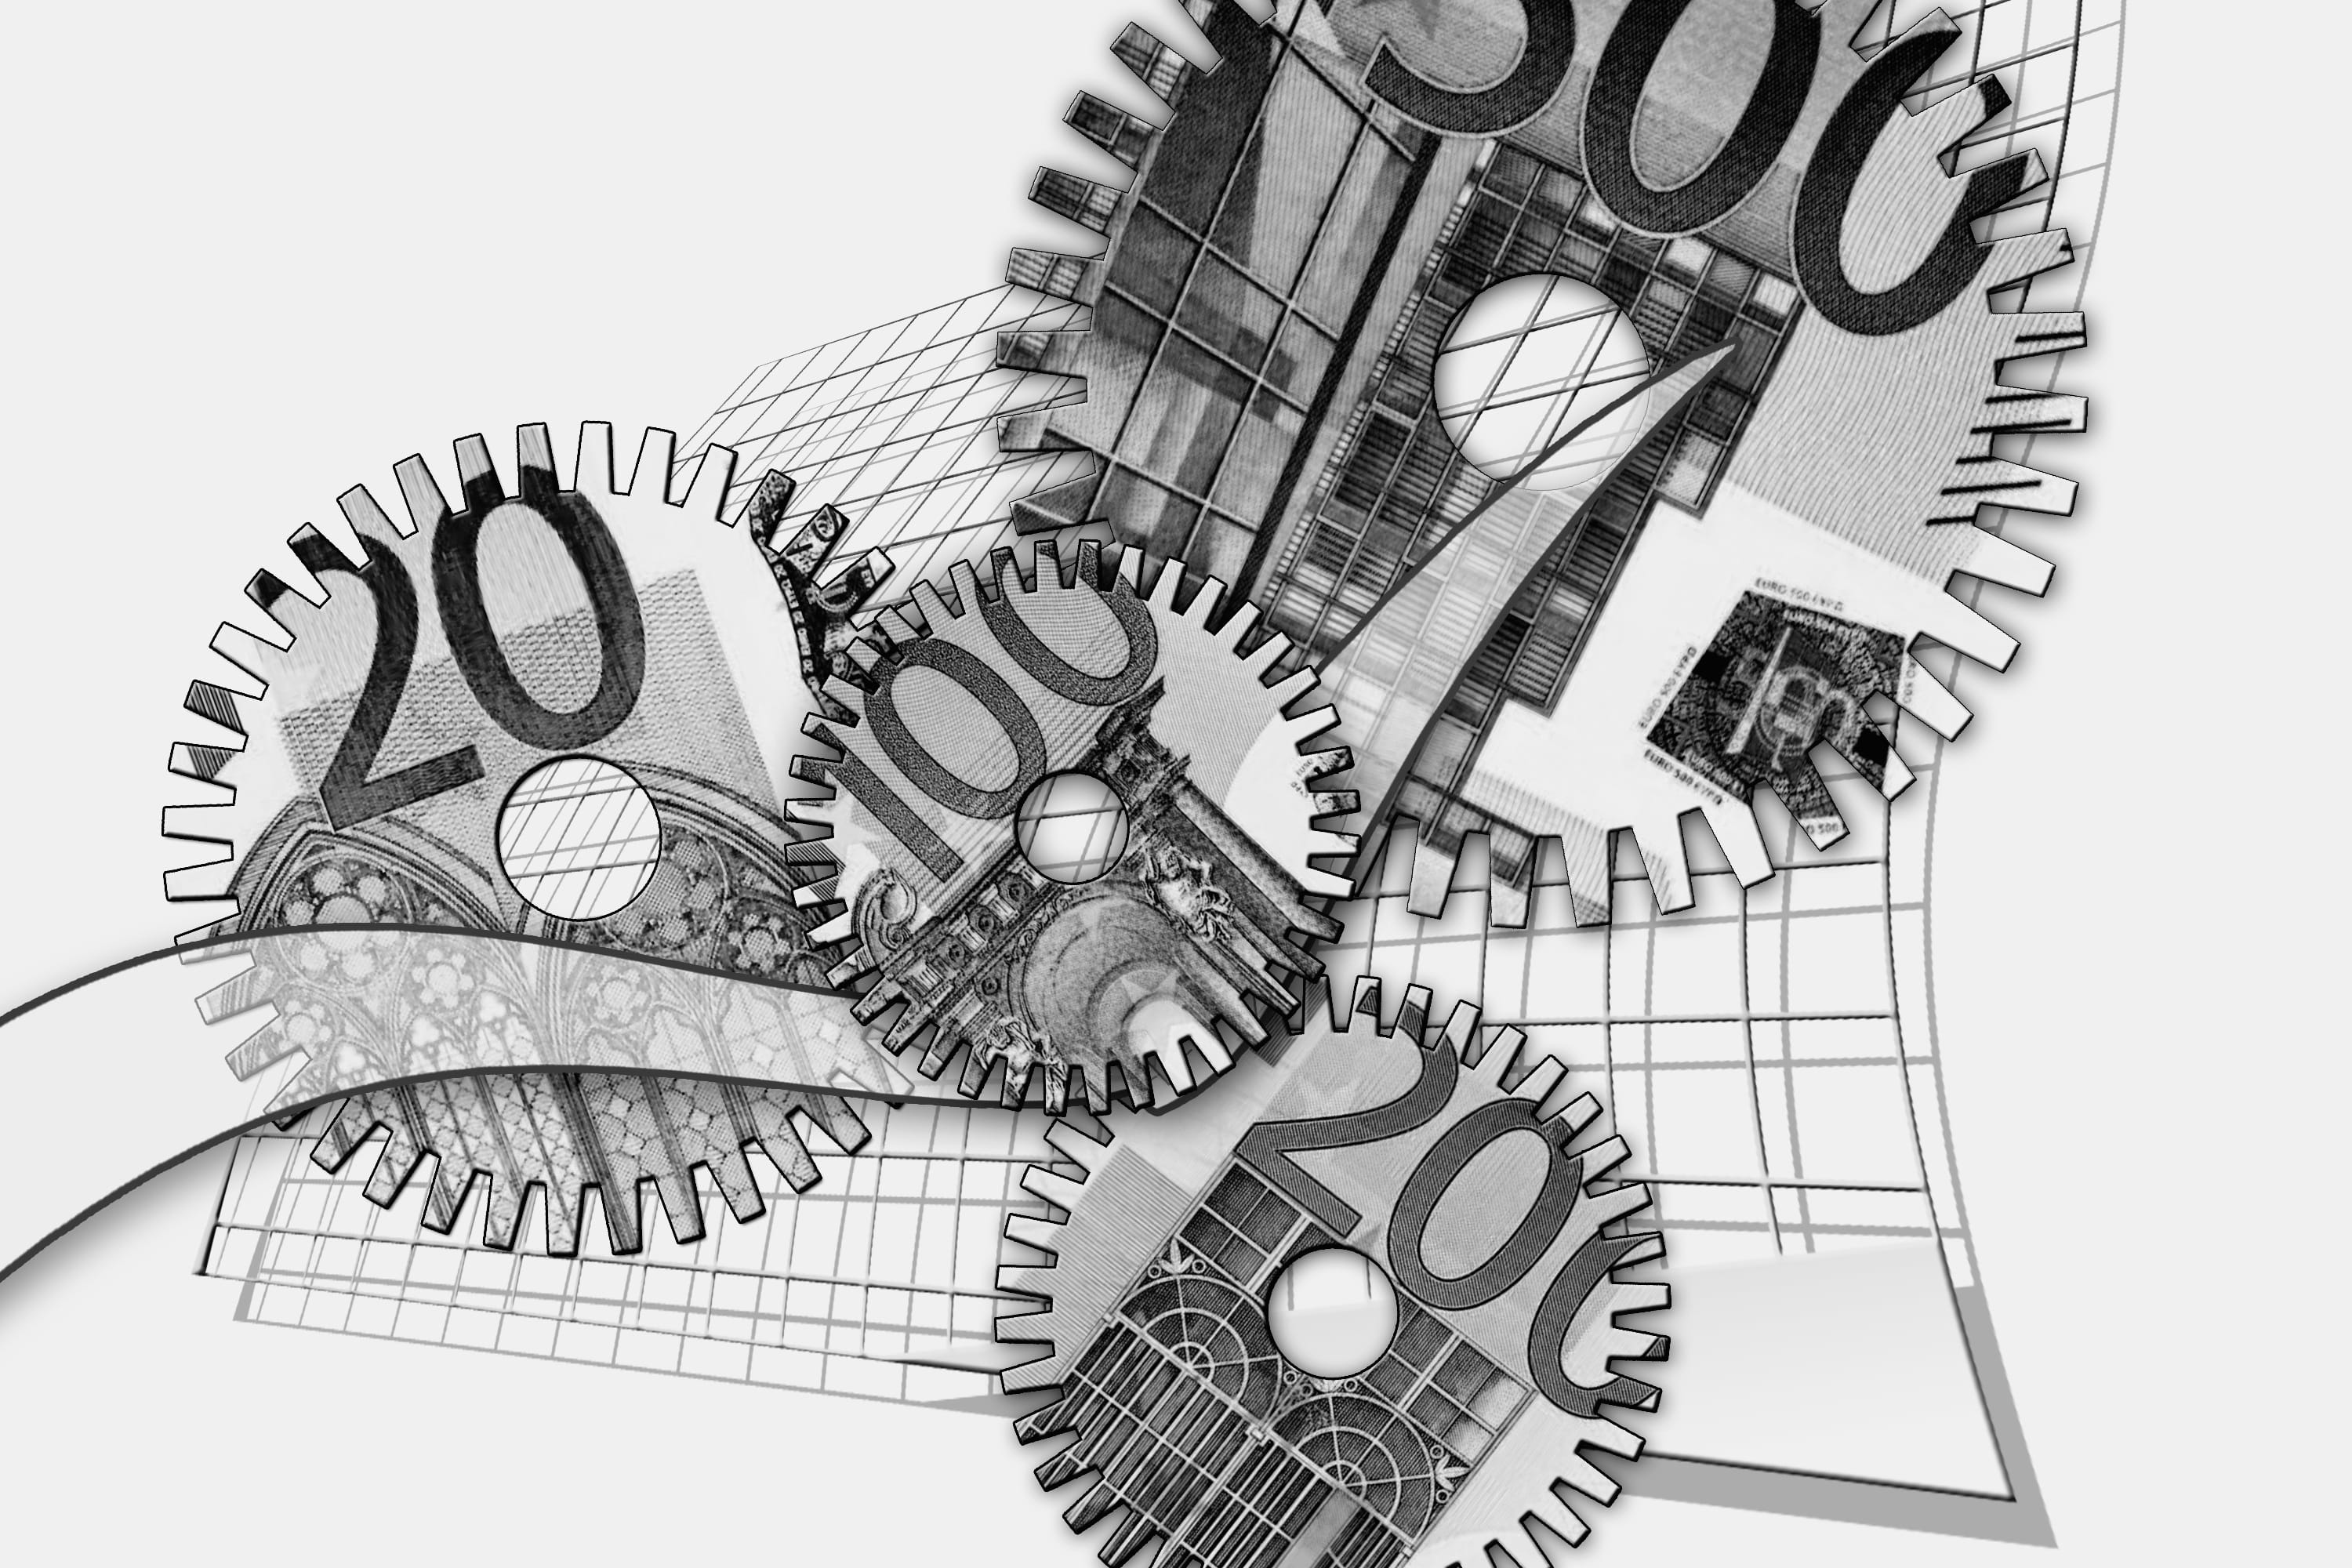 Free Download Hd Wallpaper Gray And White Illustration With Numbers Gears Euro Forex 